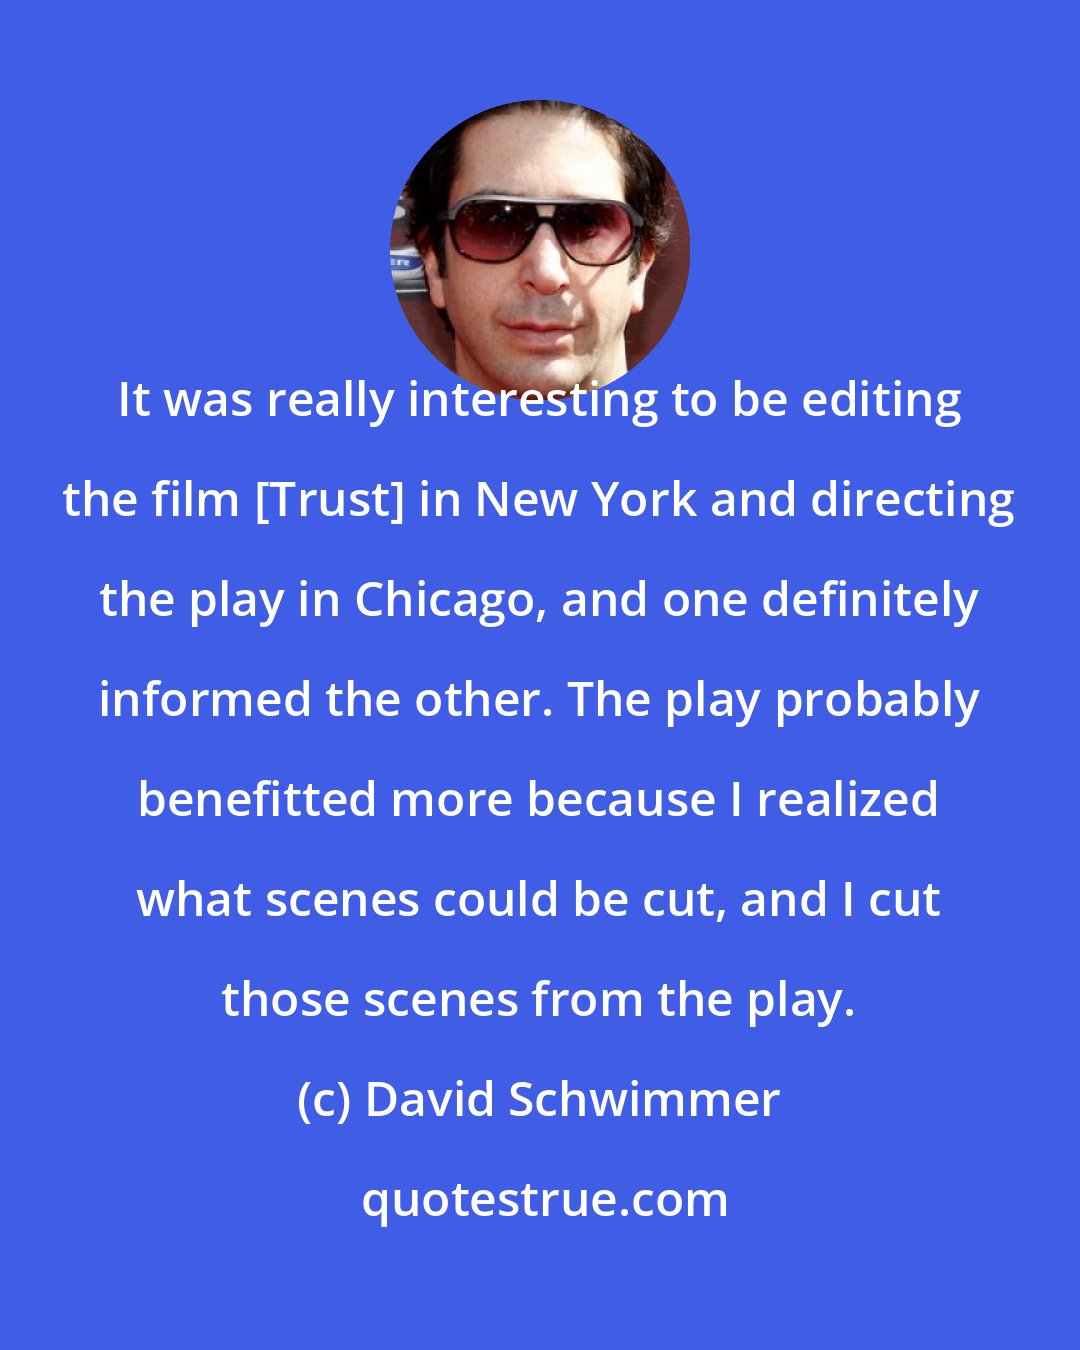 David Schwimmer: It was really interesting to be editing the film [Trust] in New York and directing the play in Chicago, and one definitely informed the other. The play probably benefitted more because I realized what scenes could be cut, and I cut those scenes from the play.